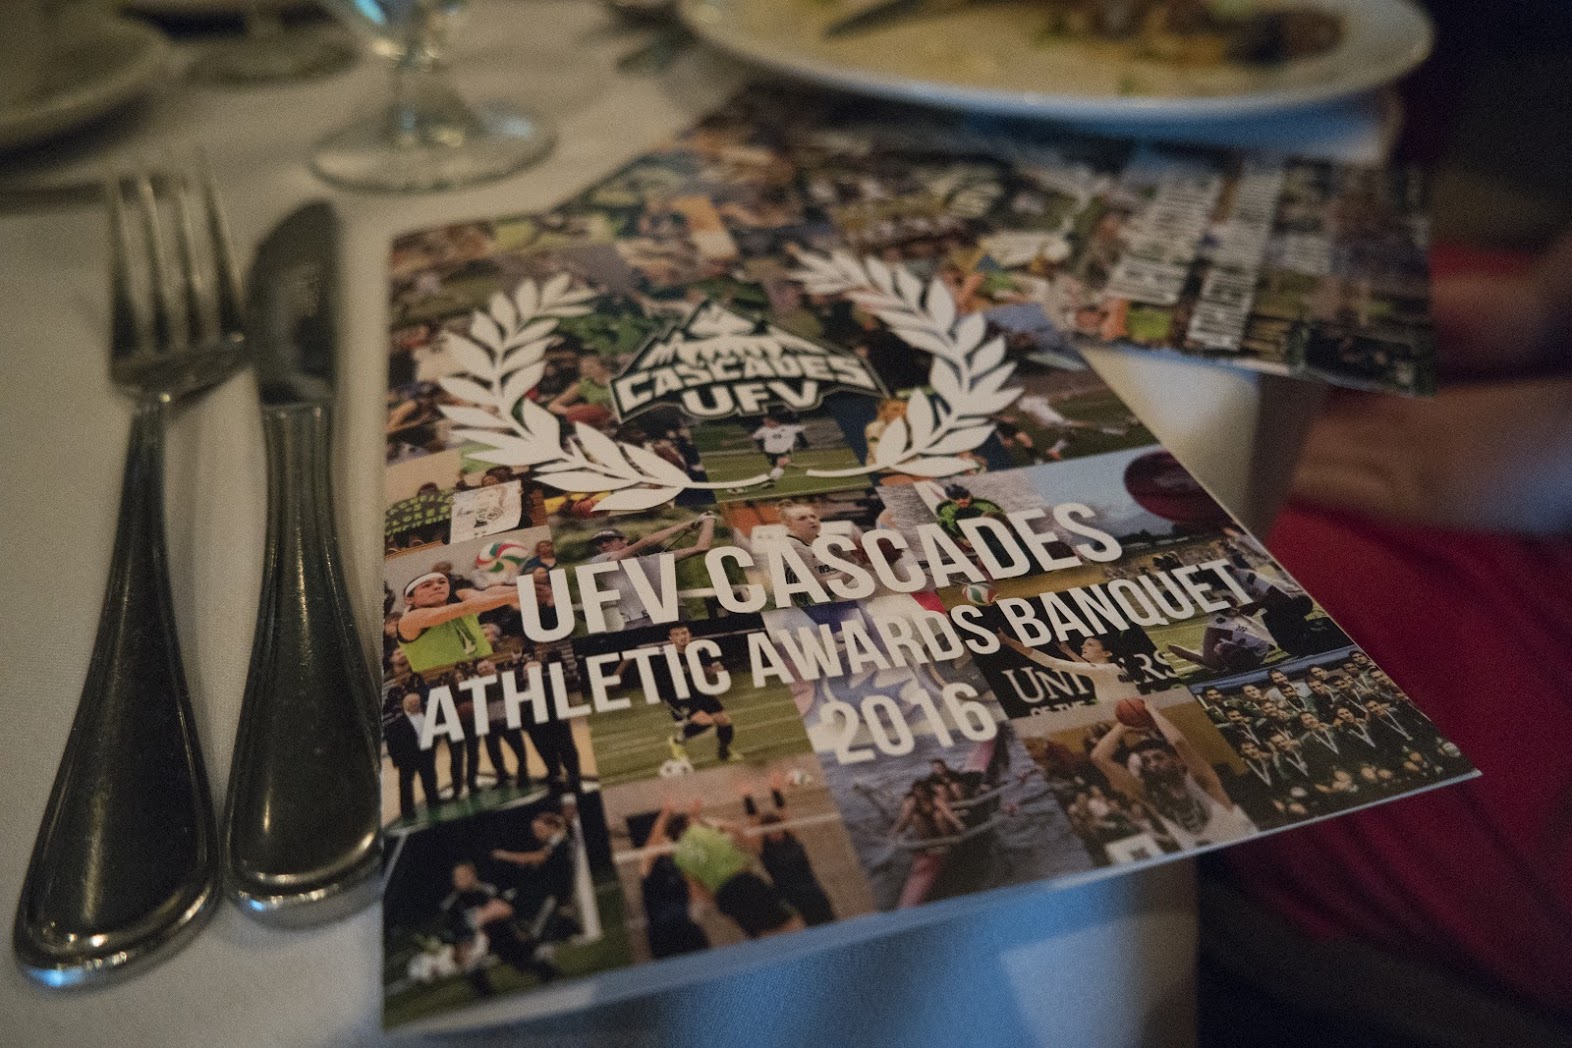 Athletics awards banquet recognizes the best of the past year in sports